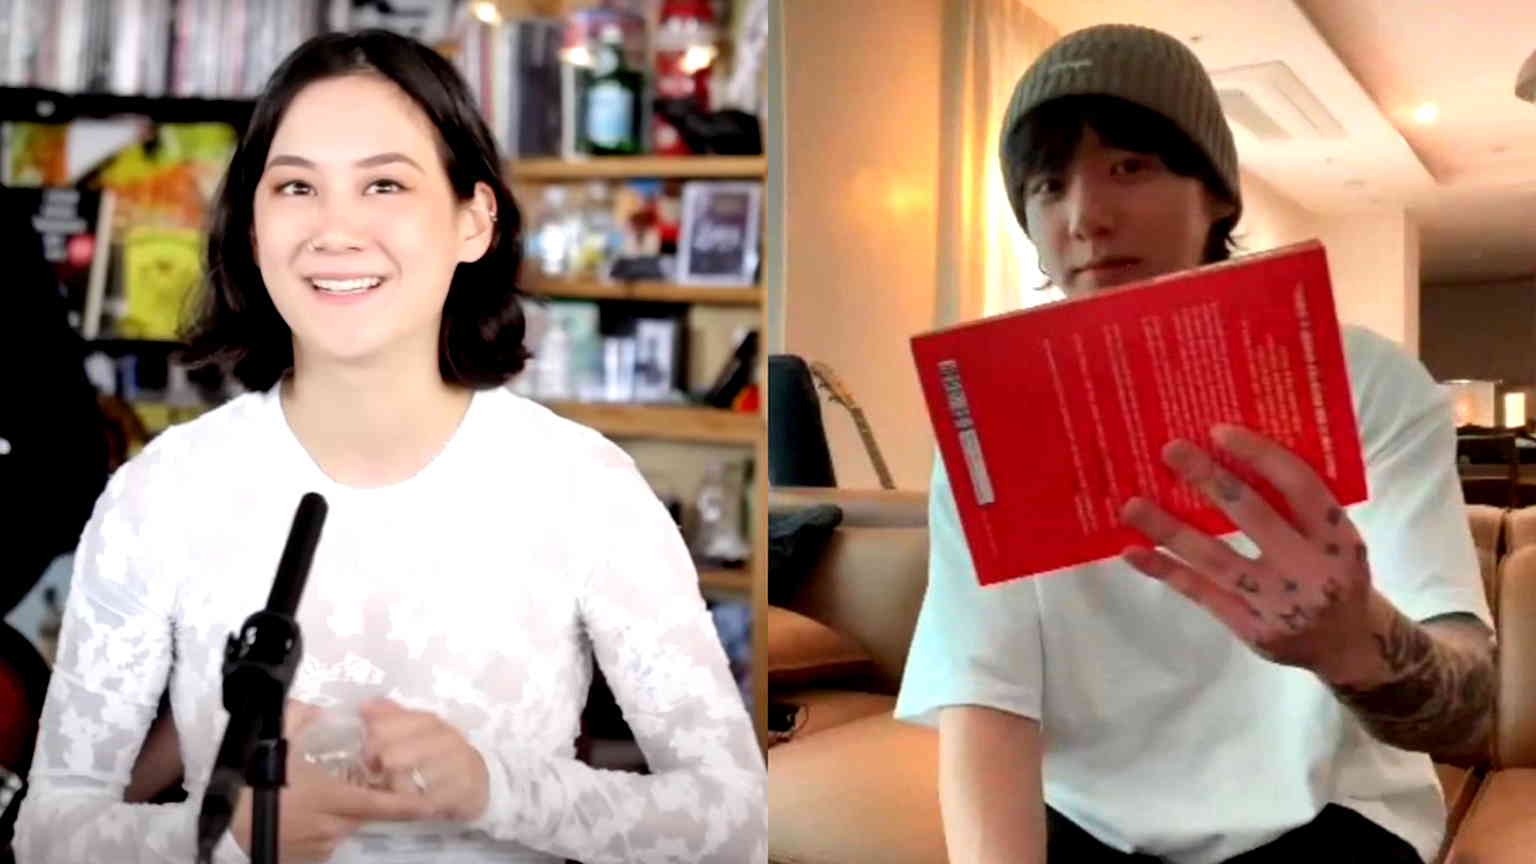 Michelle Zauner reacts to BTS’ Jungkook buying her book ‘Crying in H Mart’